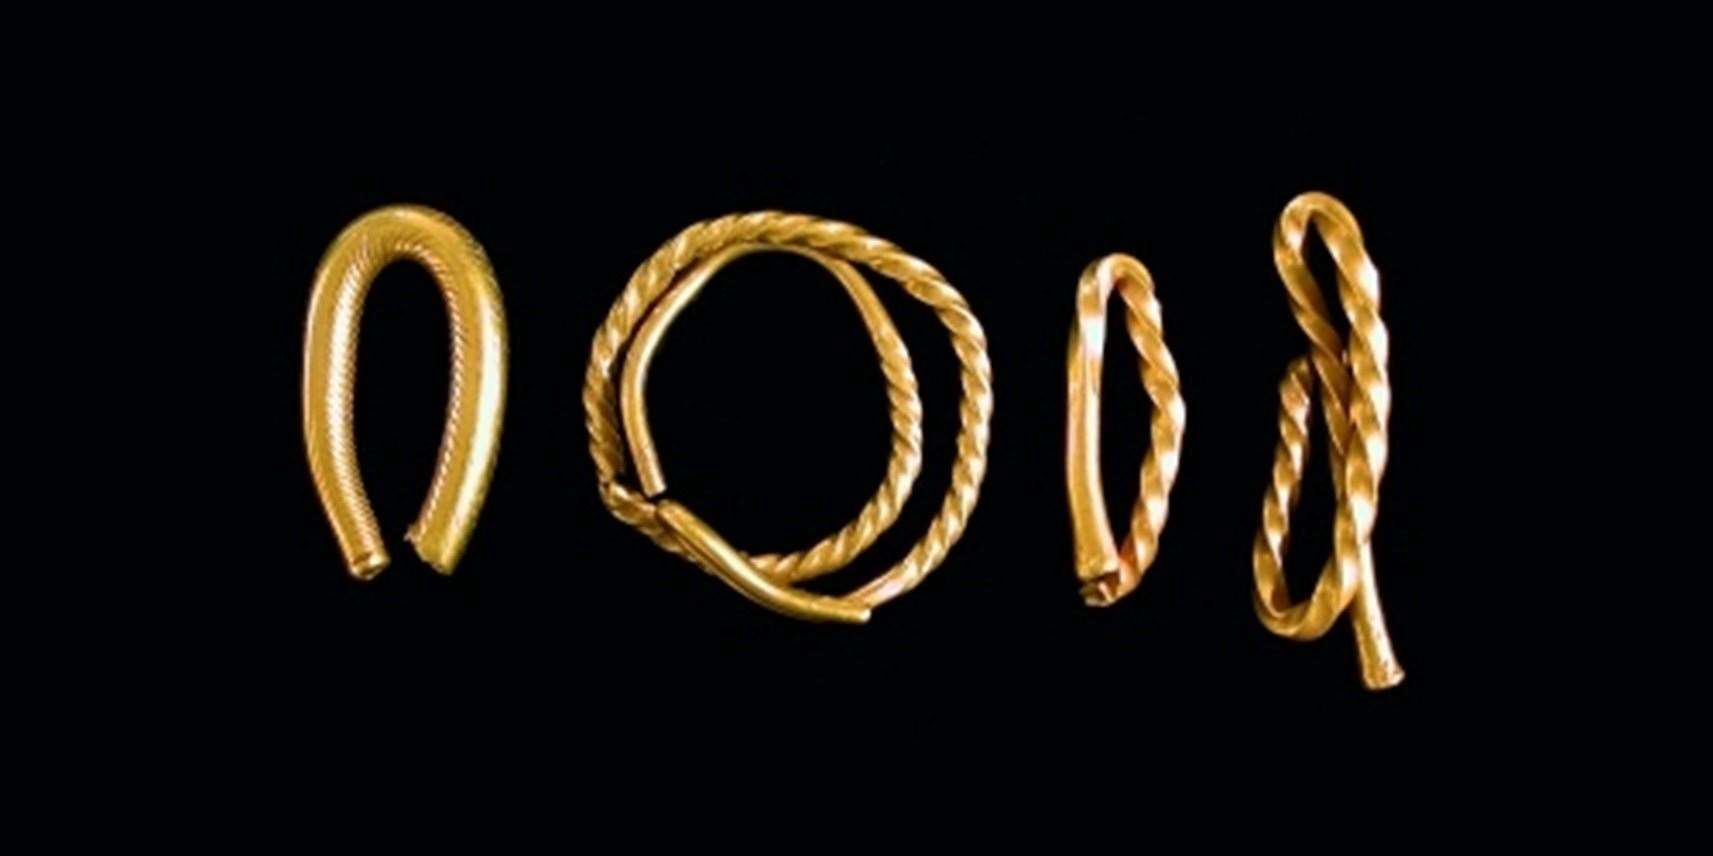 Bronze Age gold torcs will form part of the display